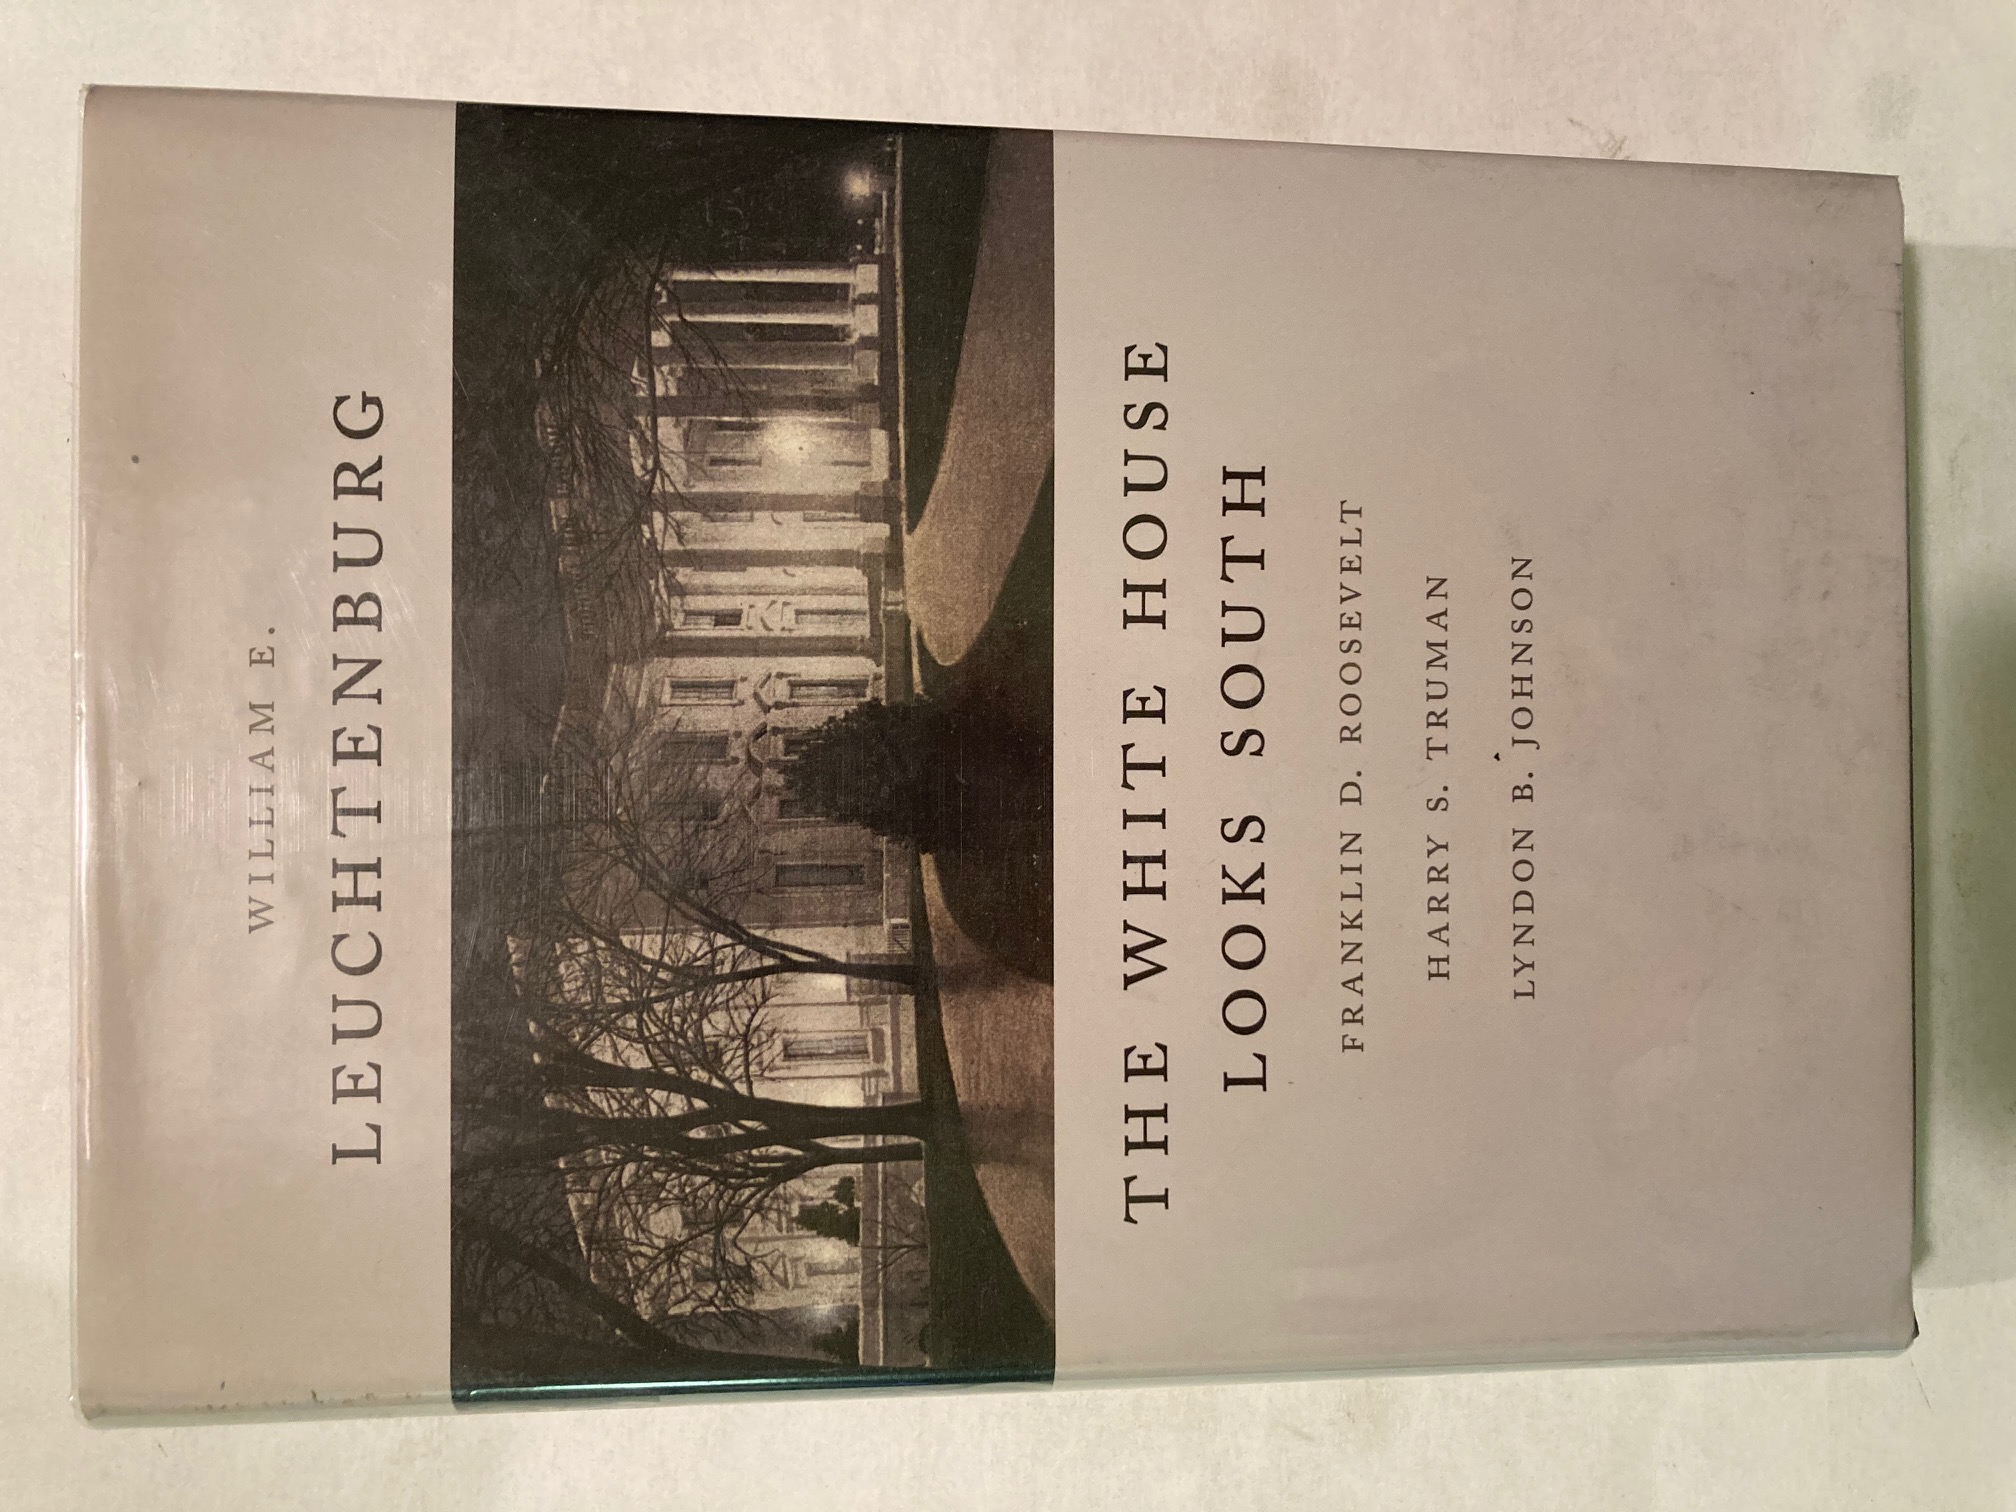 The White House Looks South: Franklin D. Roosevelt, Harry S. Truman, Lyndon B. Johnson (WALTER LYNWOOD FLEMING LECTURES IN SOUTHERN HISTORY) [1st PRINT] - Leuchtenburg, William E.